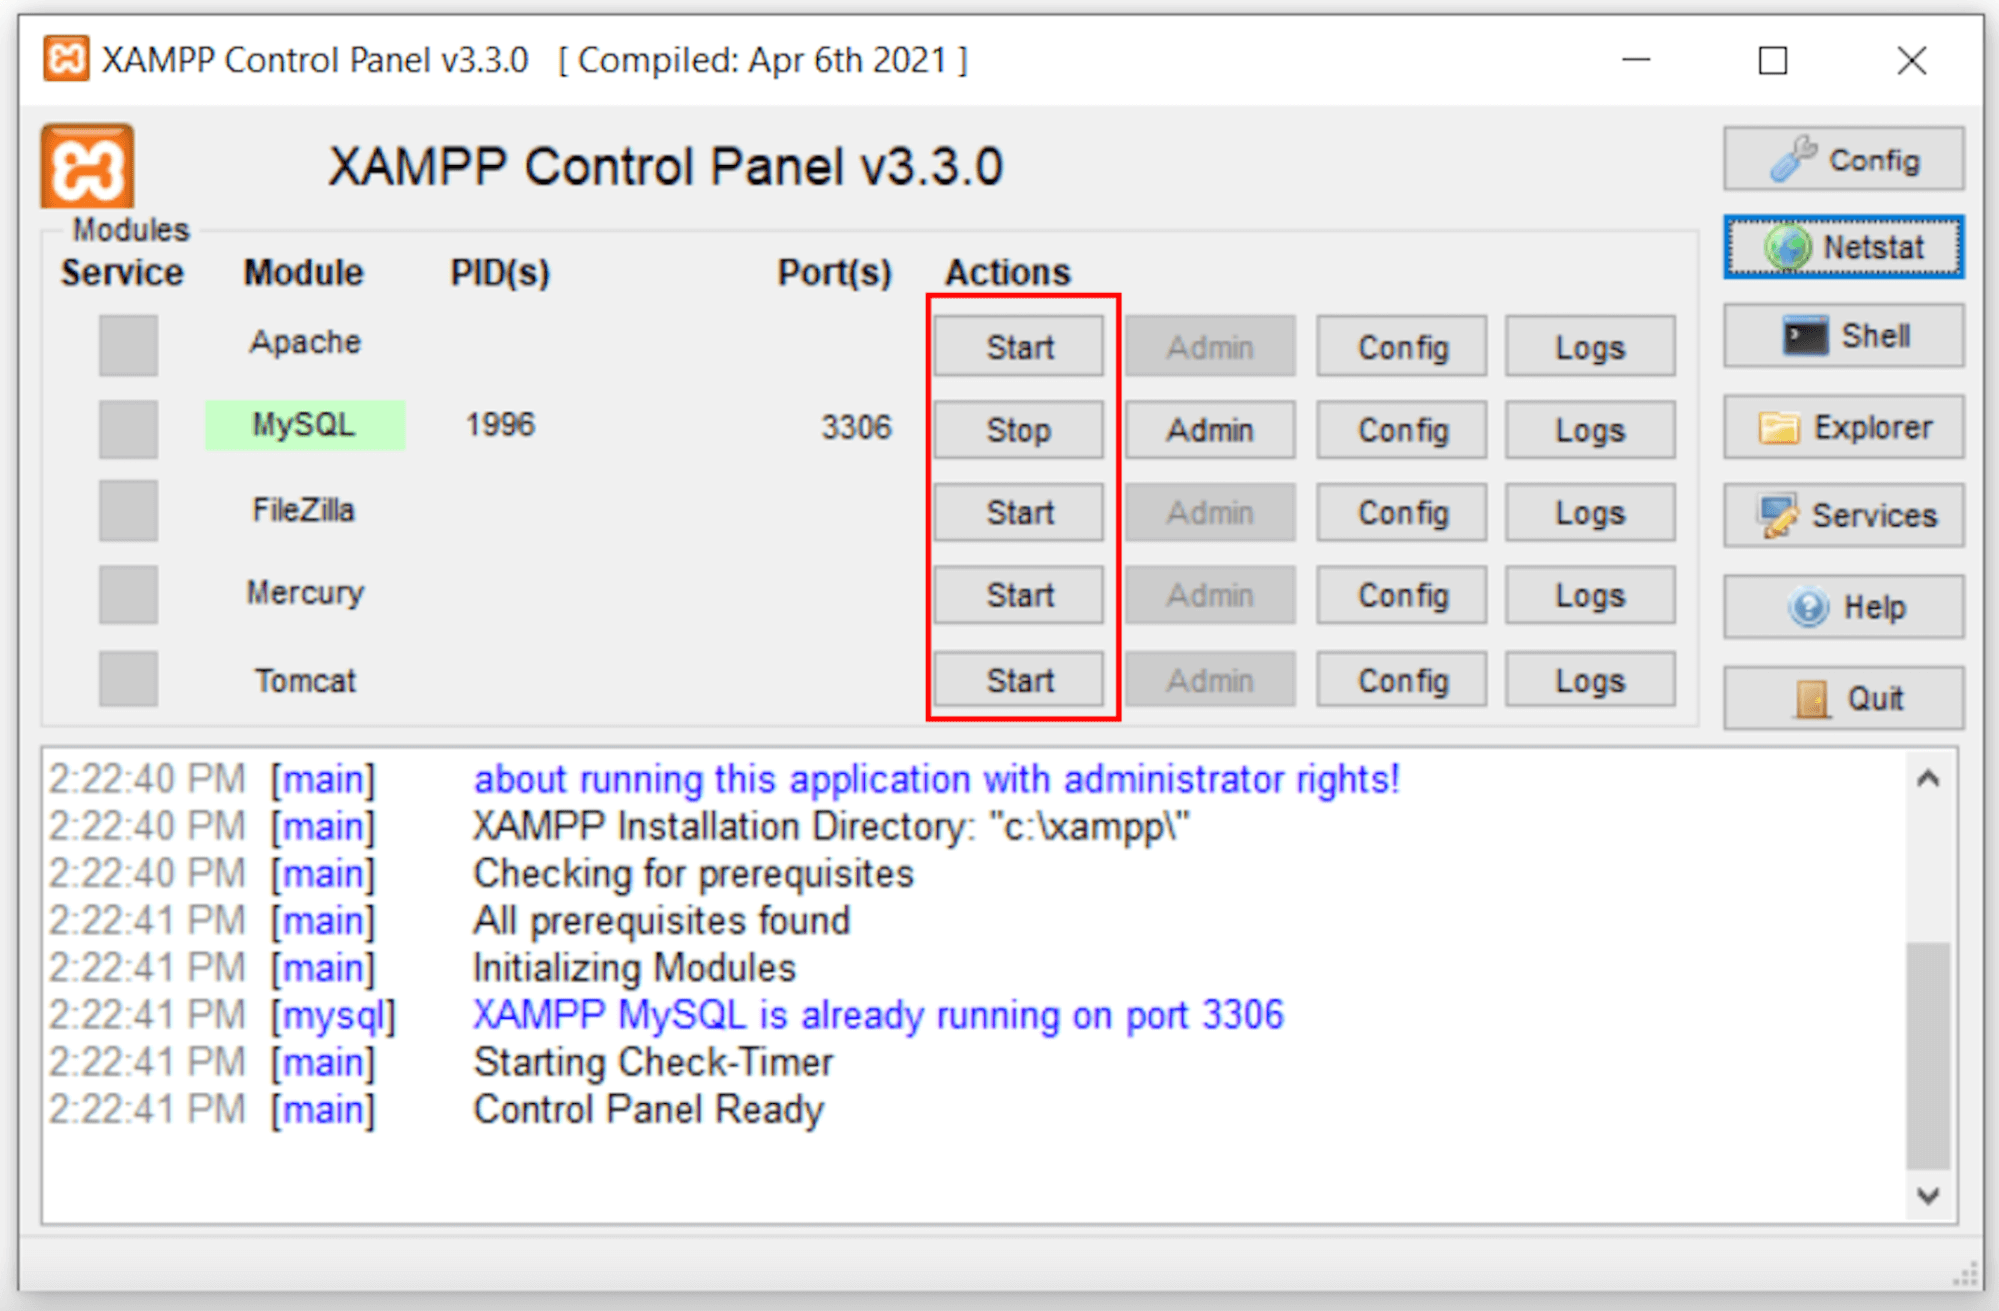 Stopping Apache from XAMPP Control Panel